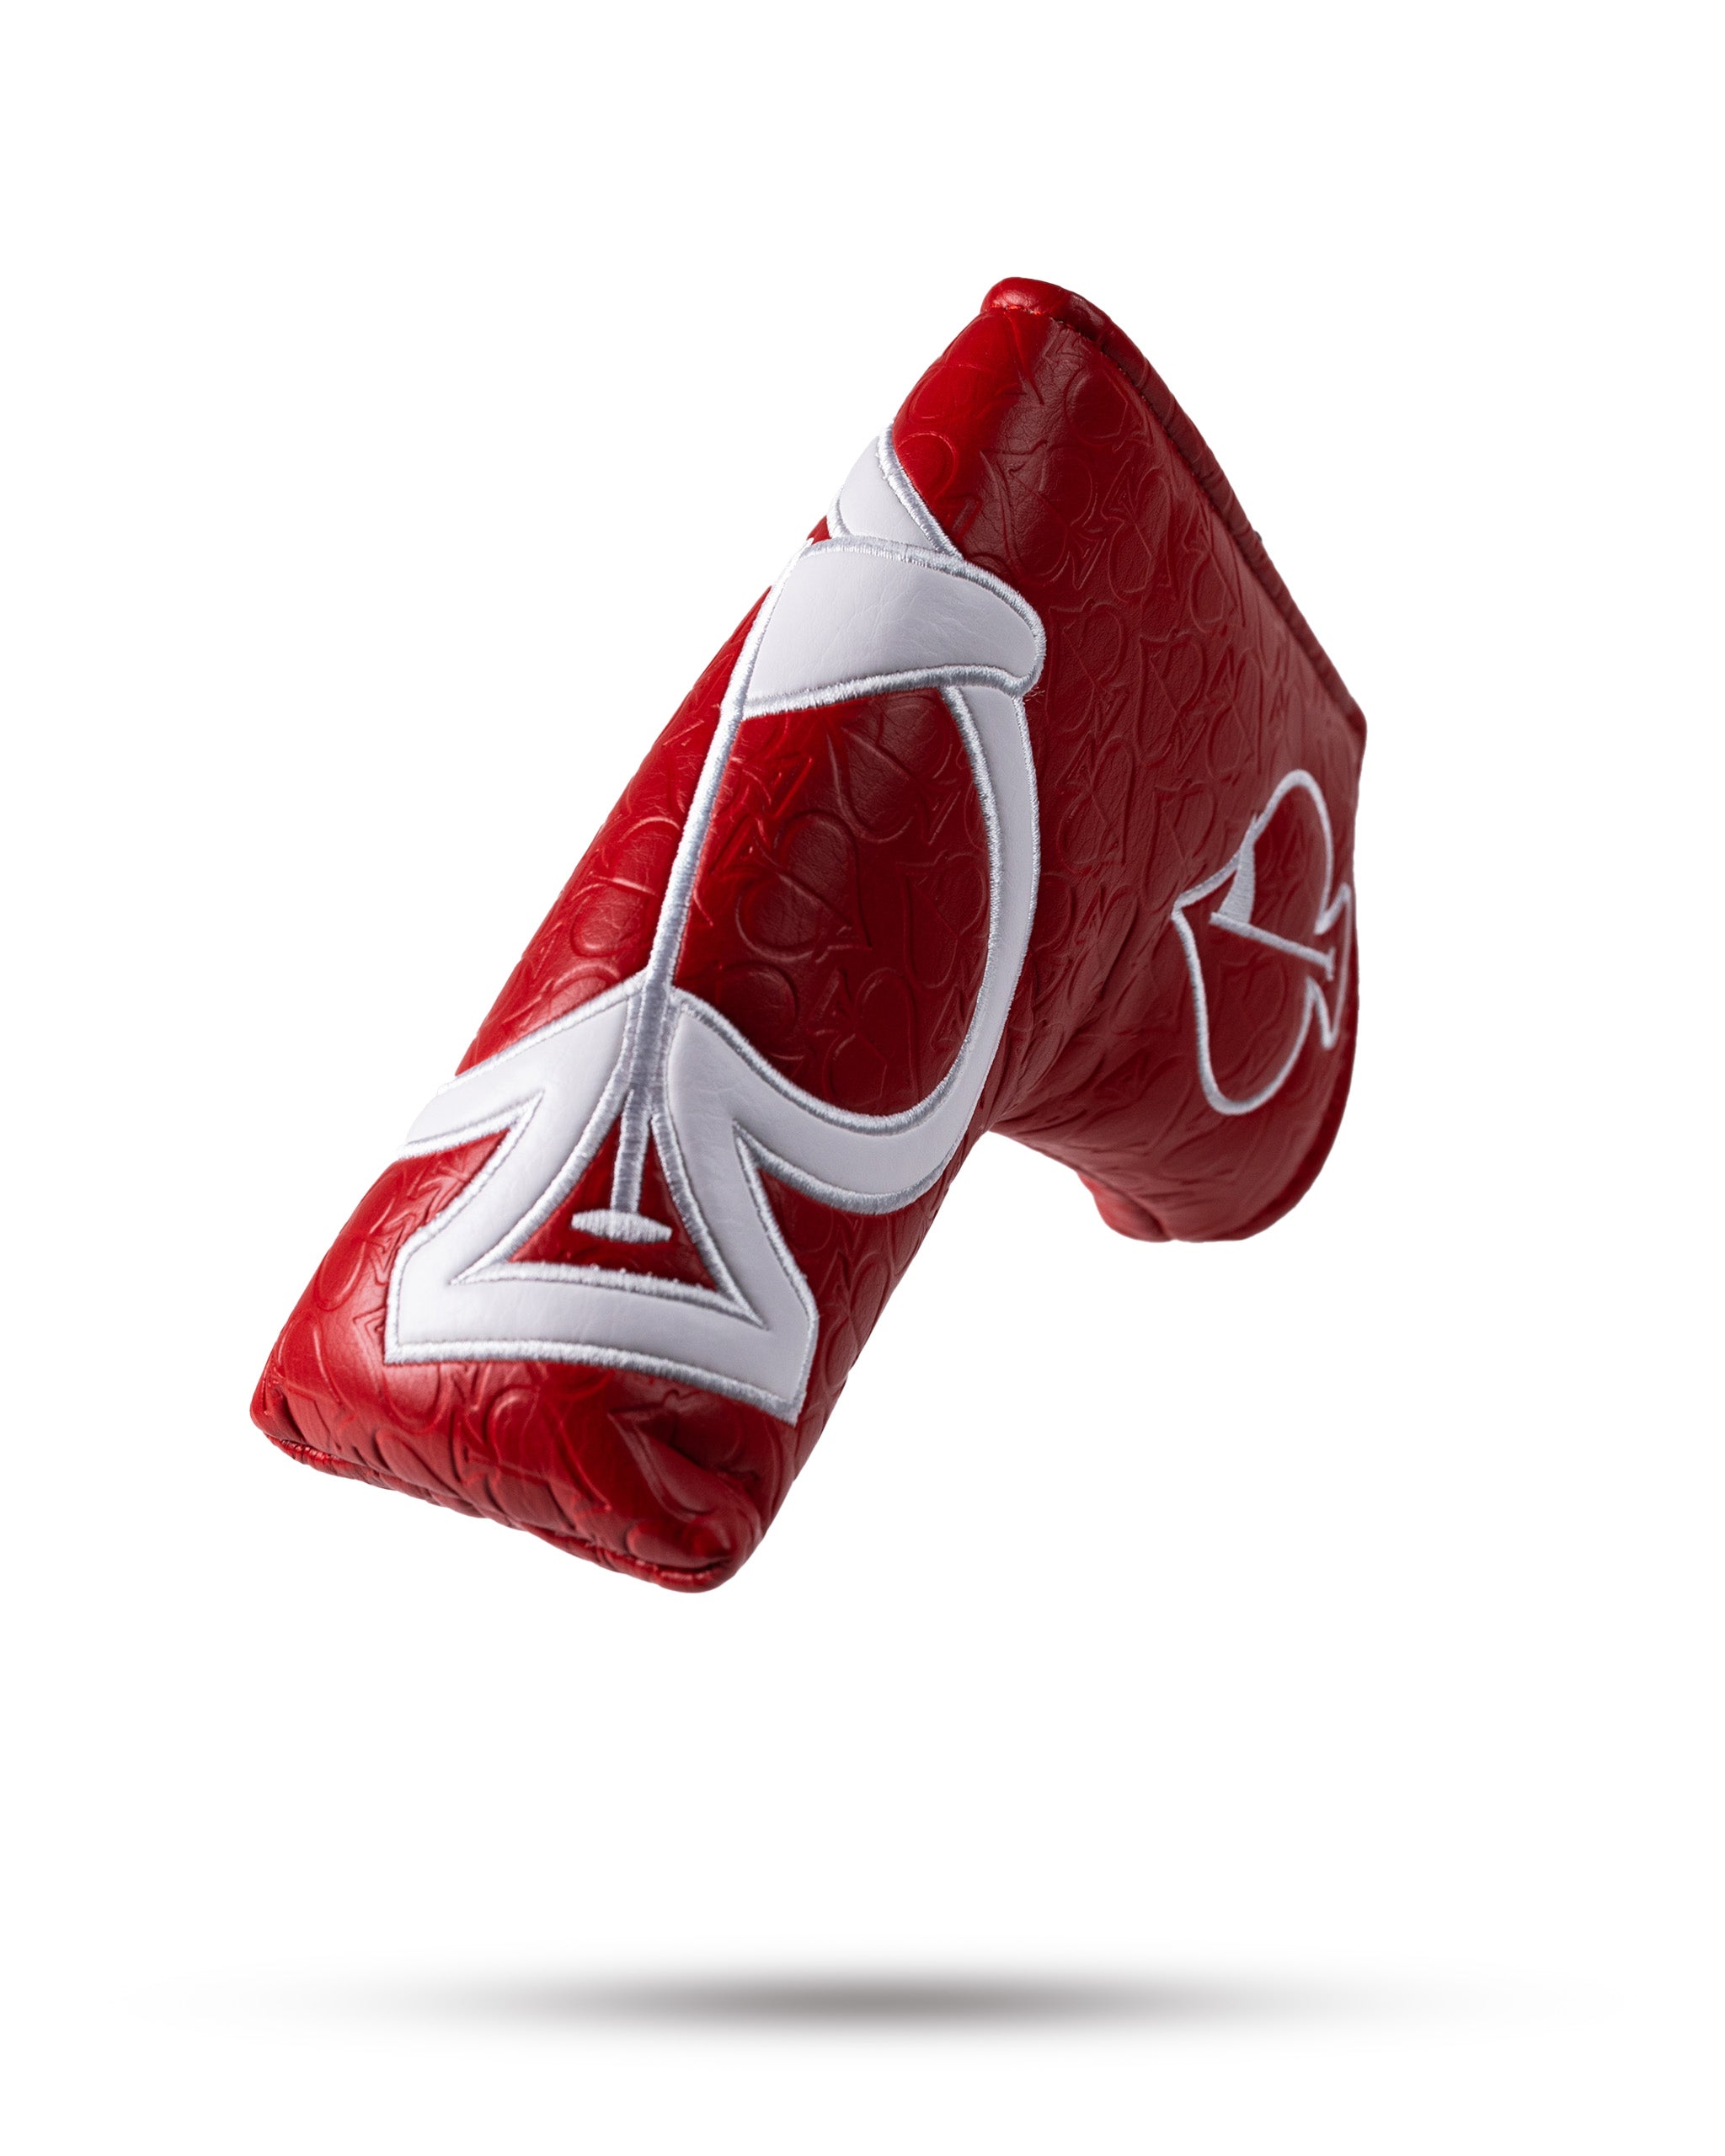 Embossed Spade Blade Putter Cover - Red